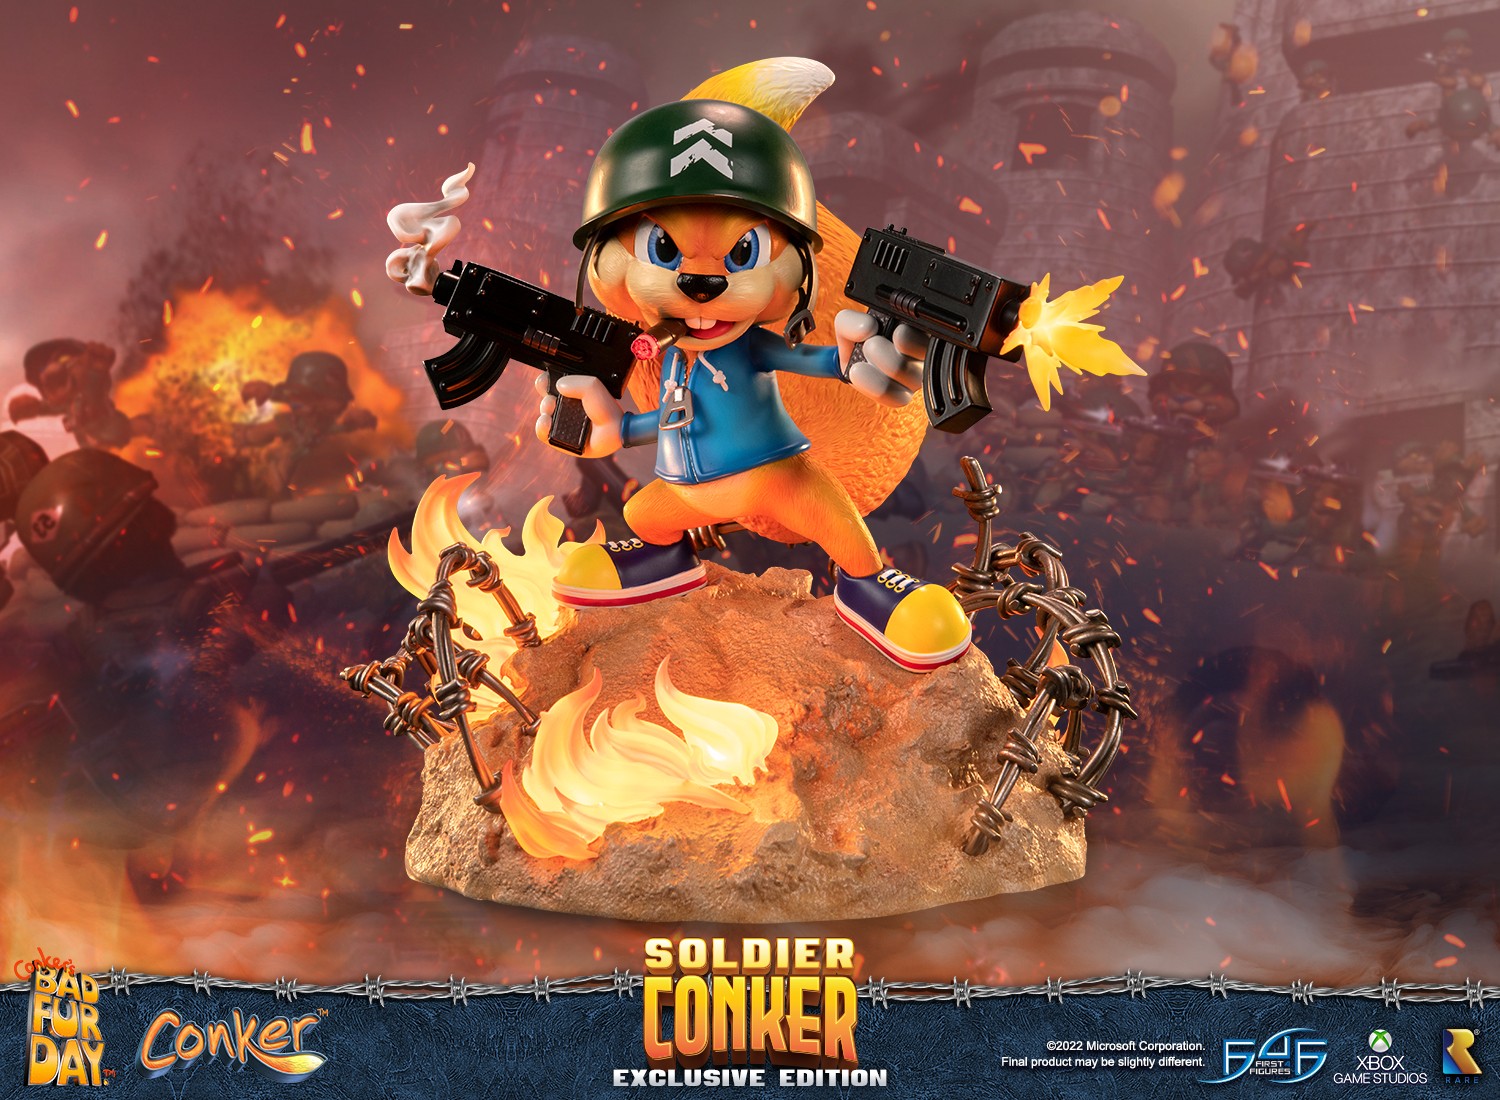 Conker: Conker's Bad Fur Day™ - Soldier Conker (Exclusive Edition)